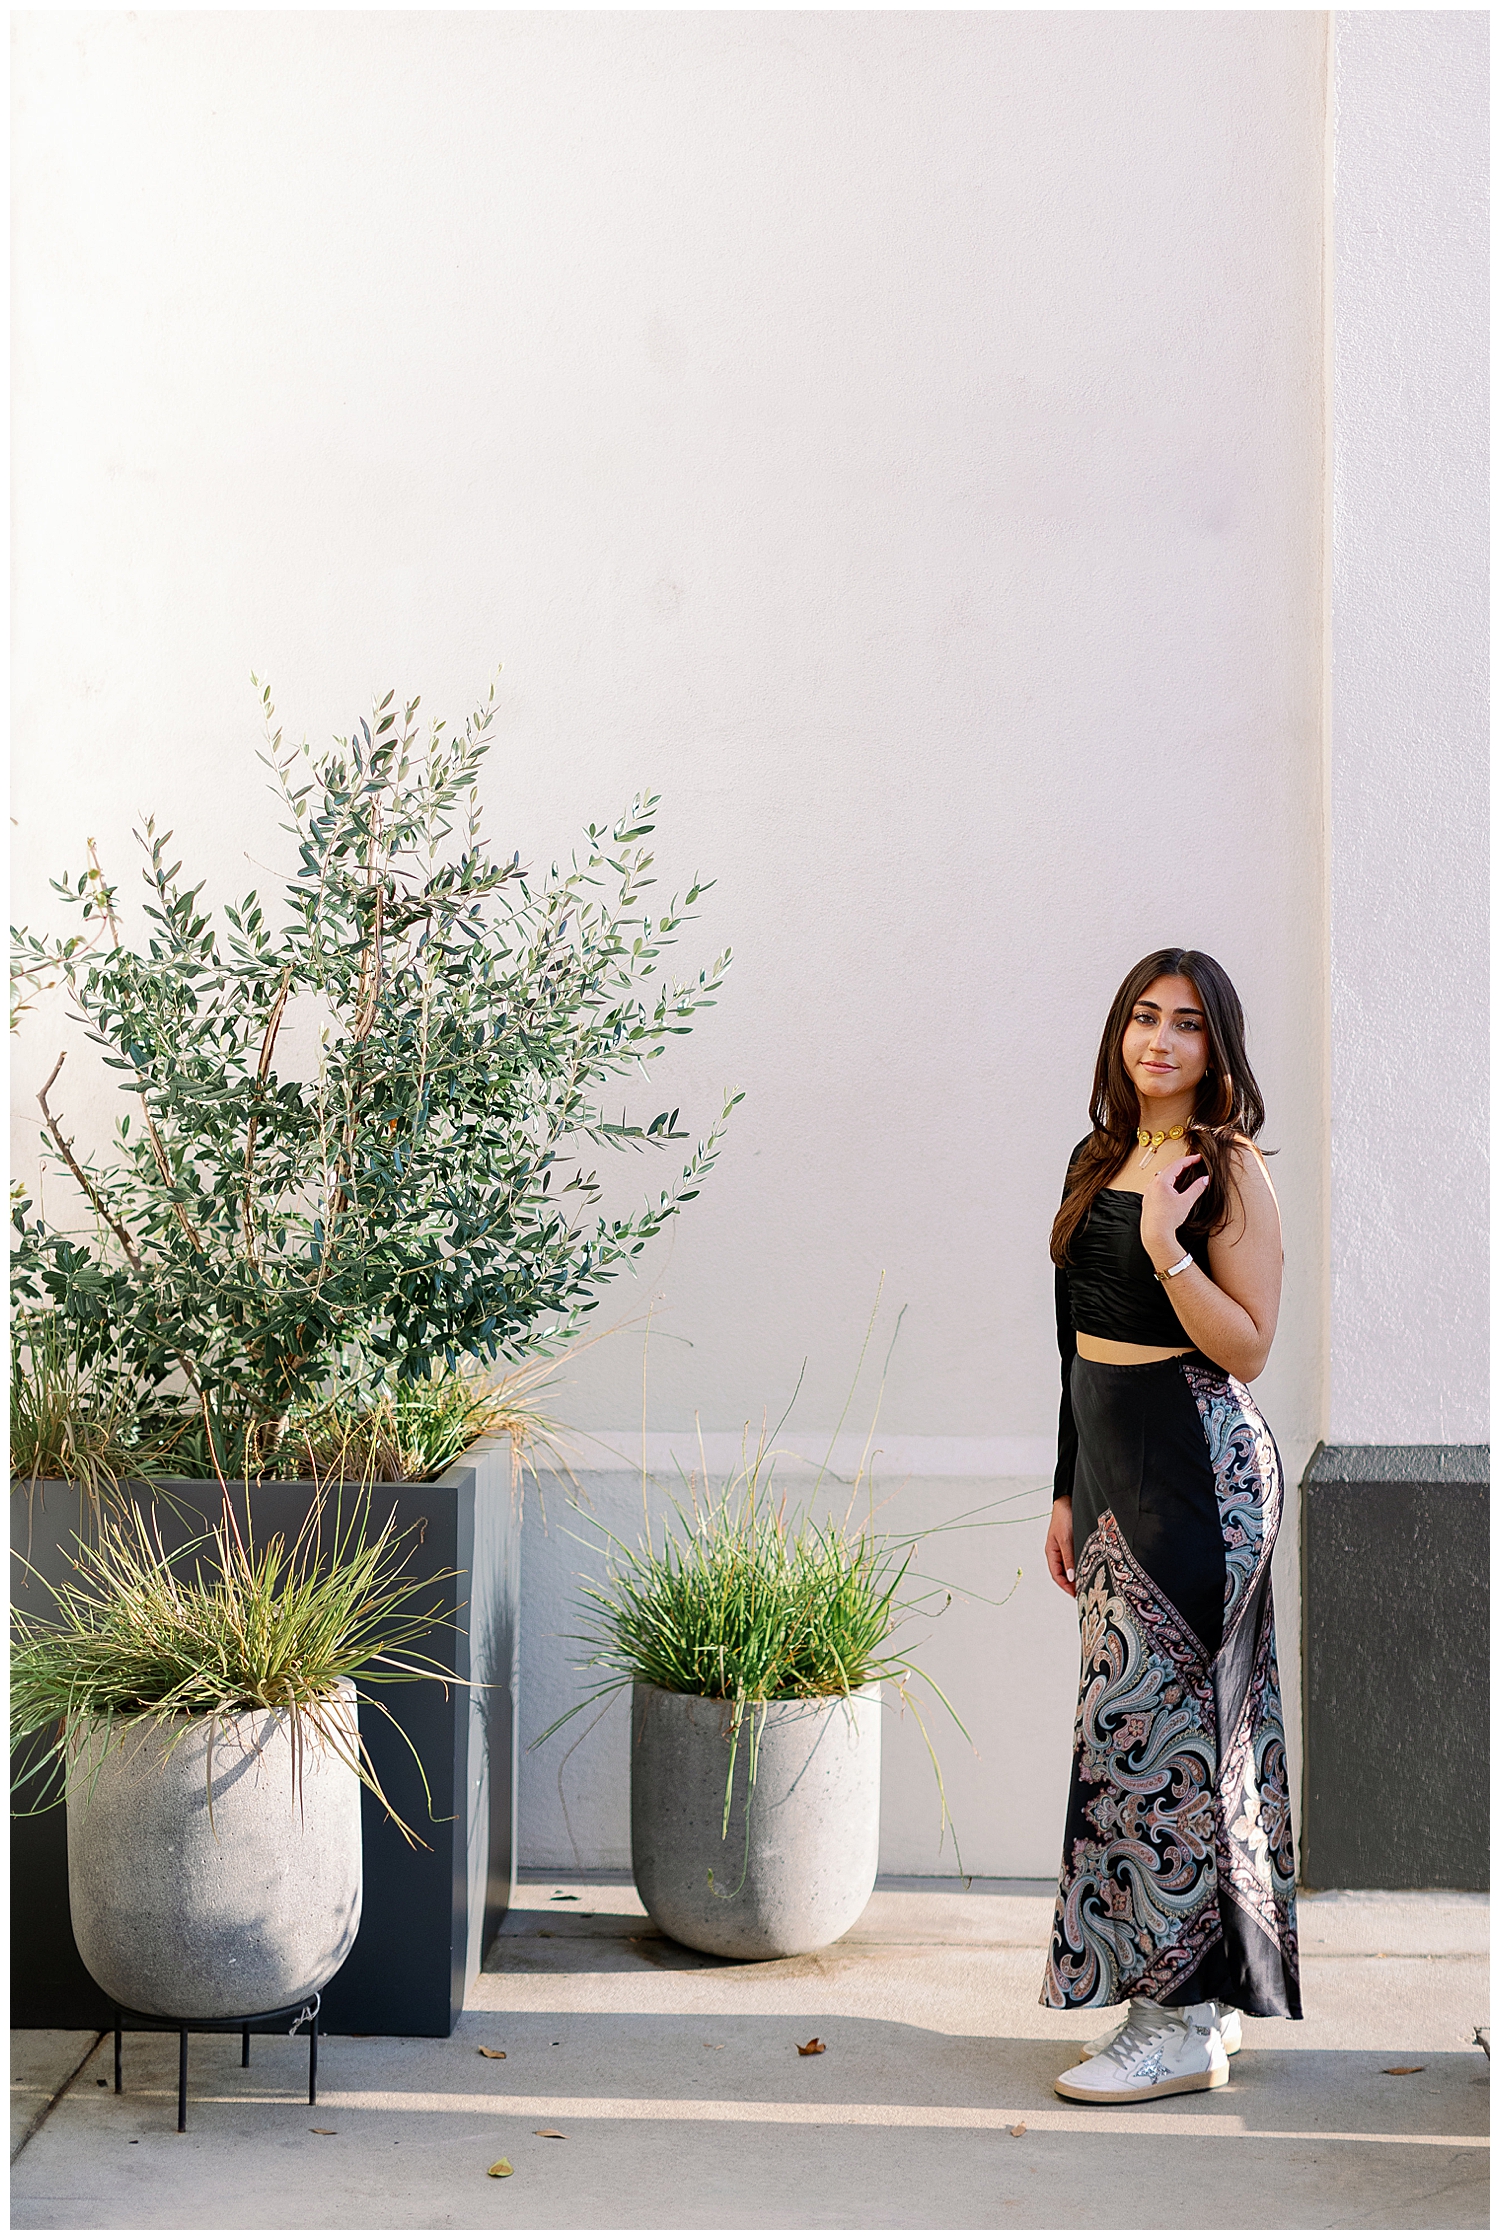 Uptown Park white wall with greenery and girl standing in front in black dress